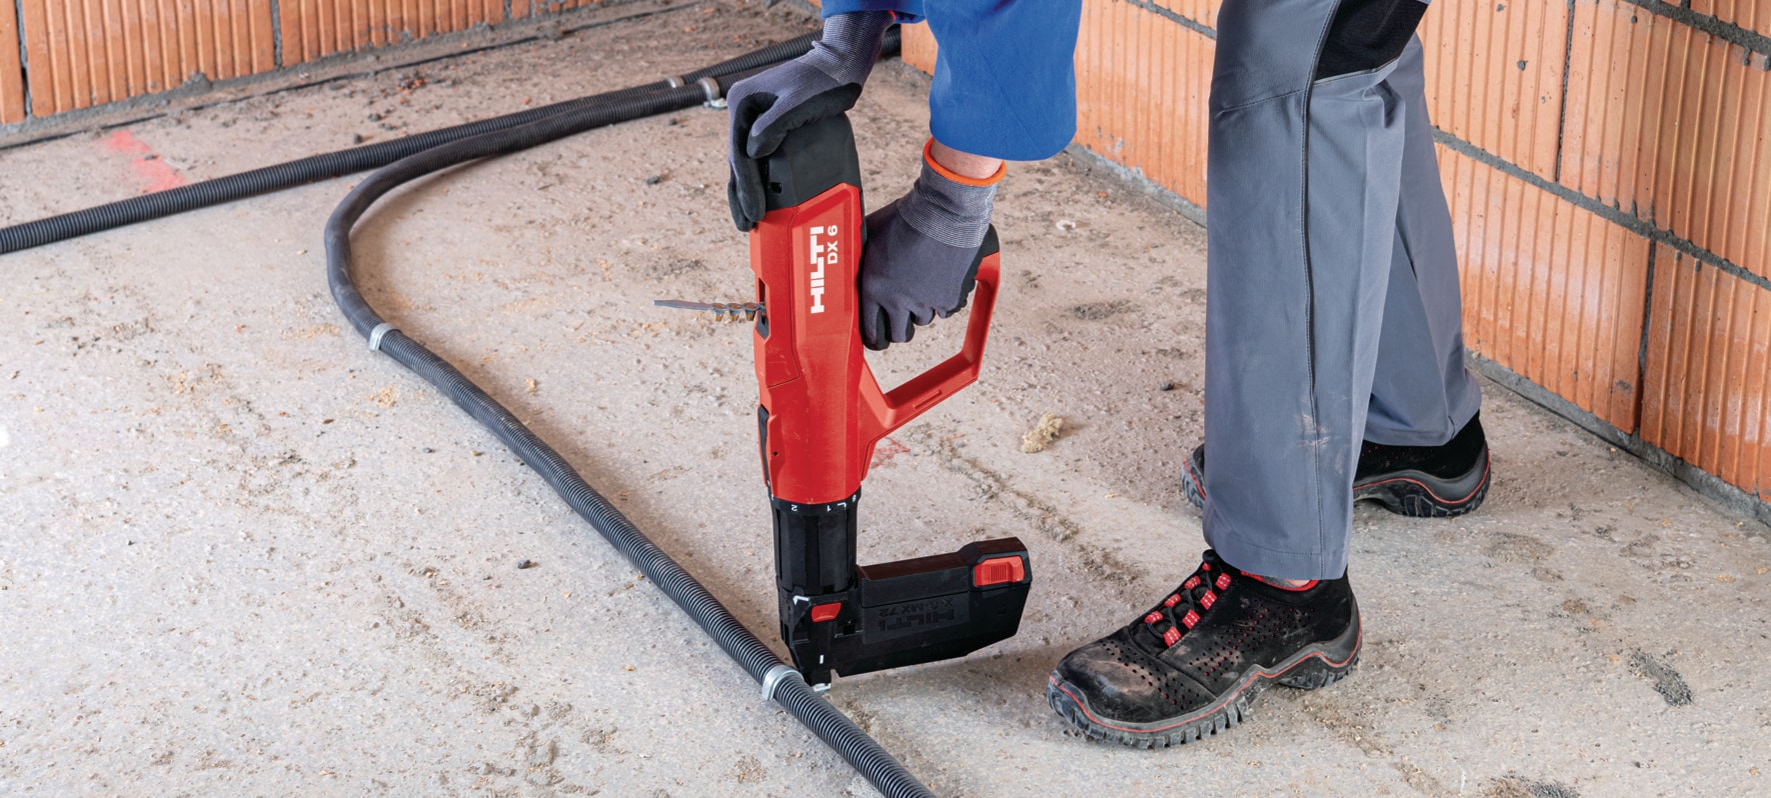 Dx 6 Mx Powder-Actuated Tool With Magazine - Powder Actuated Direct  Fastening Tools - Hilti Finland